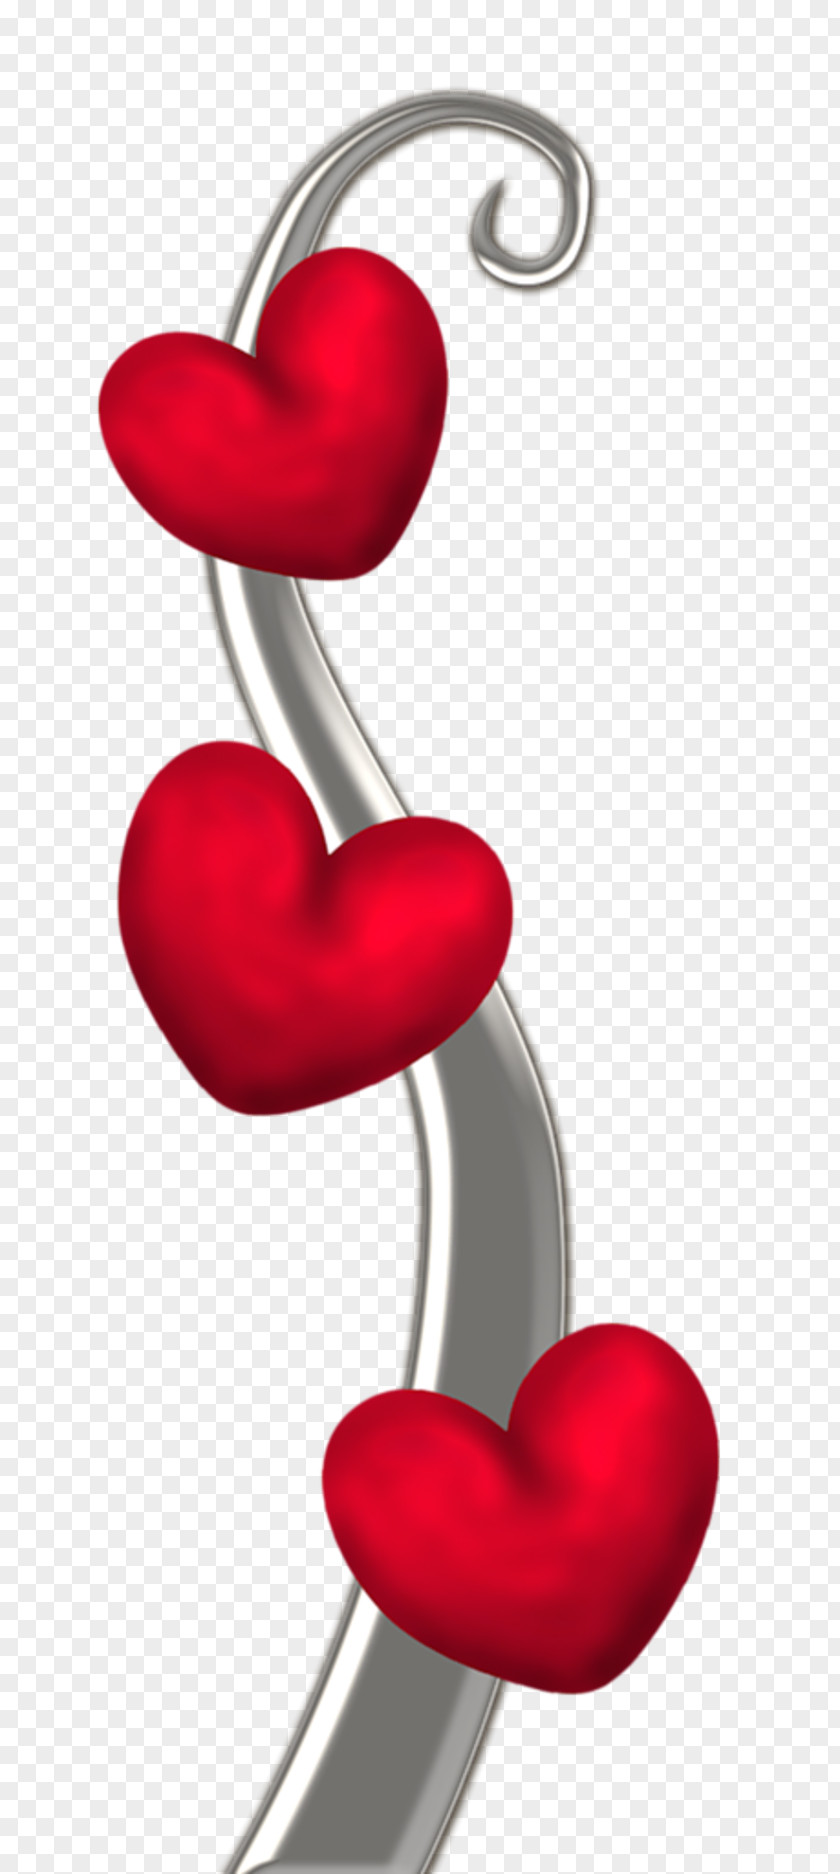 Sweet Love Heart Valentine's Day Clip Art PNG